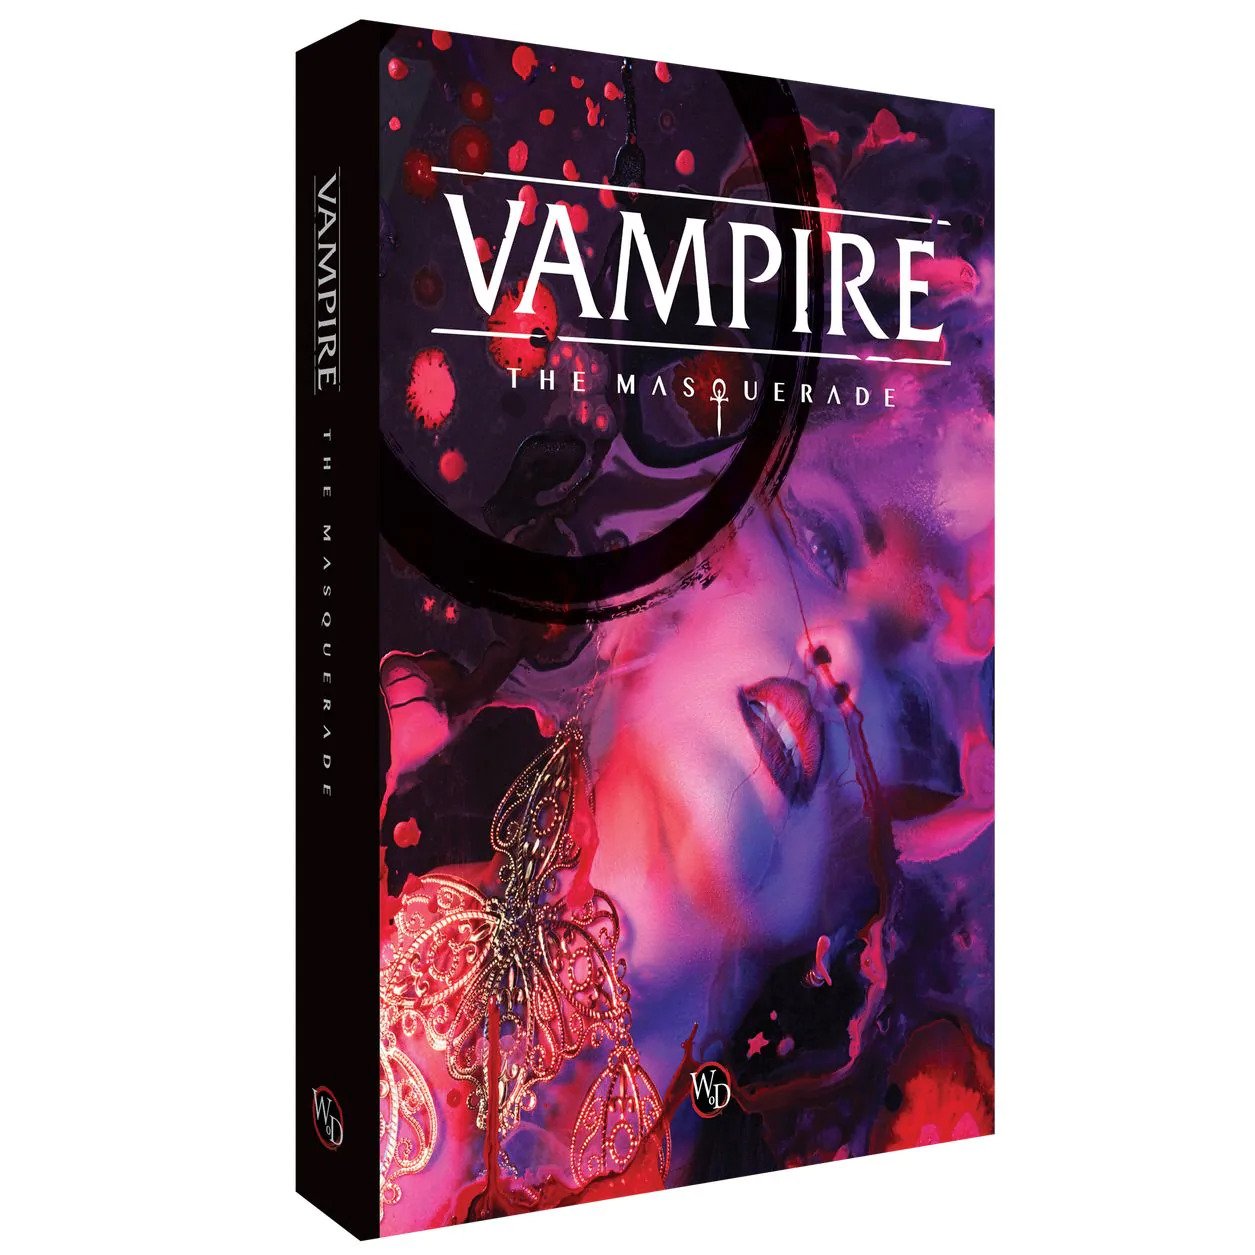 Vampire: The Masquerade 5th Edition Roleplaying Game Players Guide